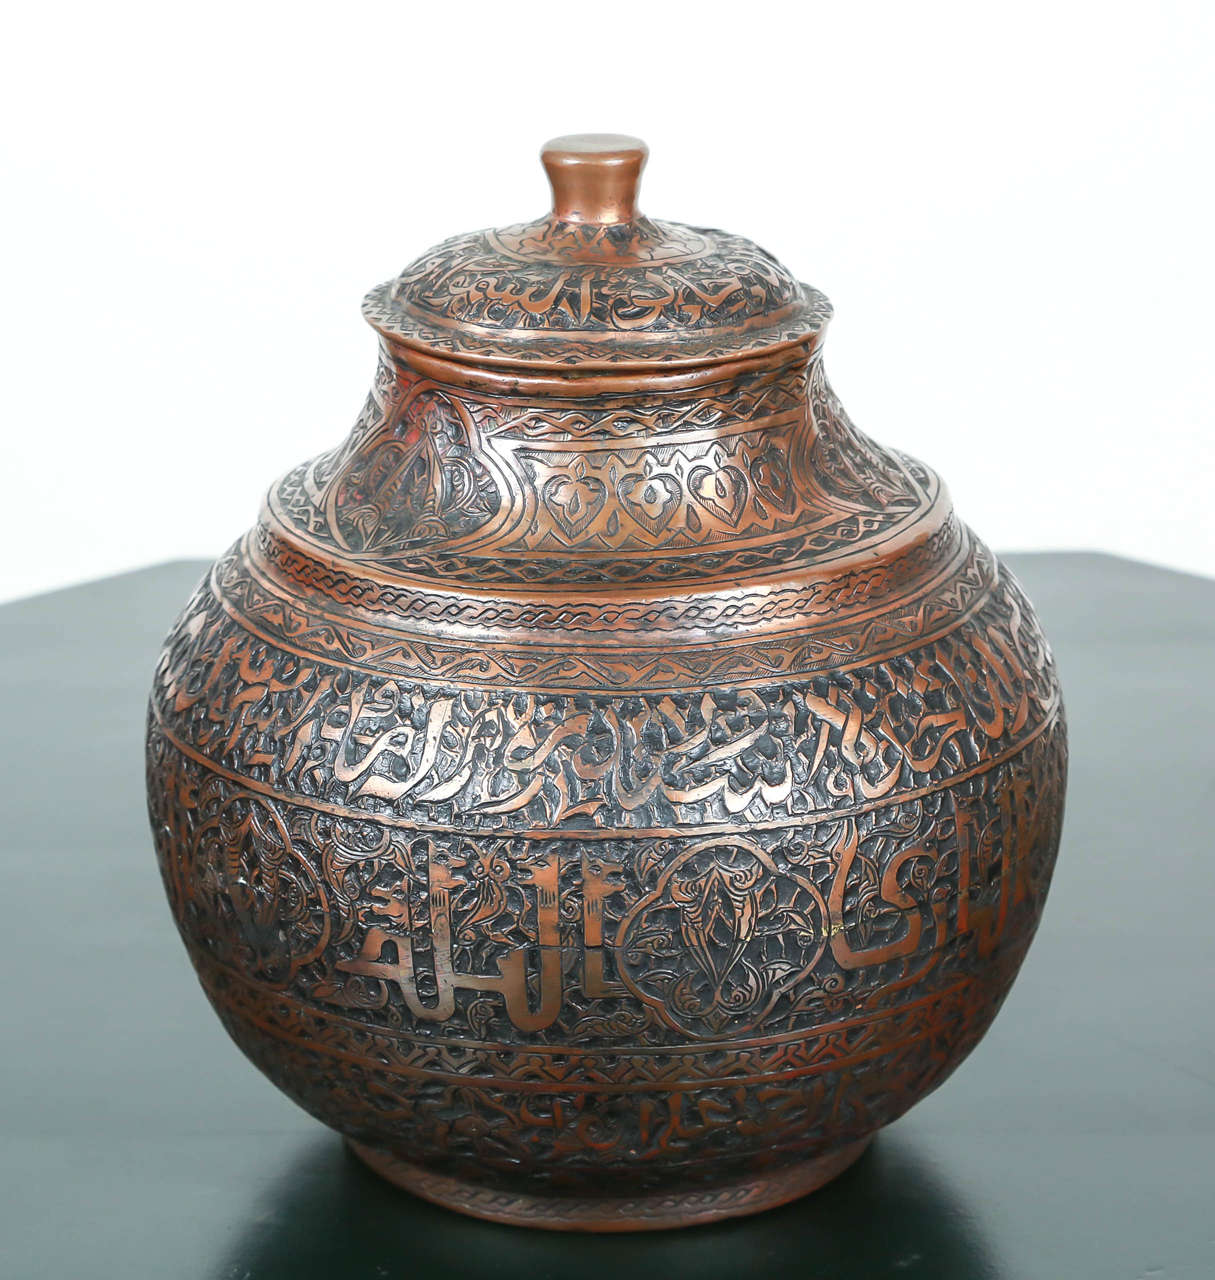 A Middle Eastern Persian Mameluke tinned copper jar with lid.
Heavily hand-hammered with Kufic Persian brass calligraphy all around and geometric Islamic interlace.